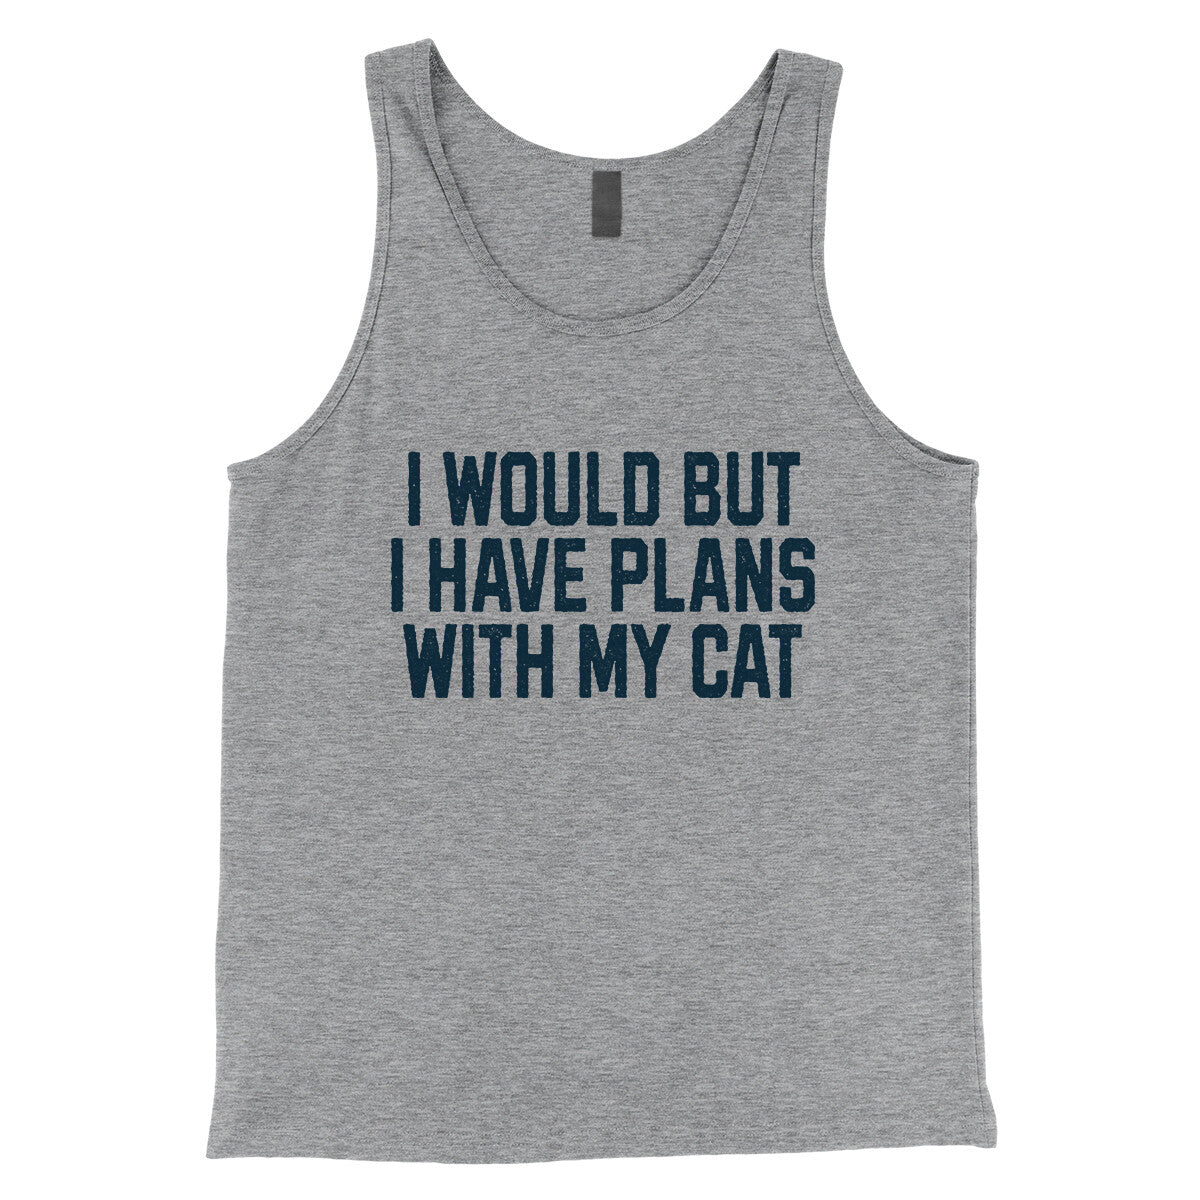 I Would but I Have Plans with My Cat in Athletic Heather Color